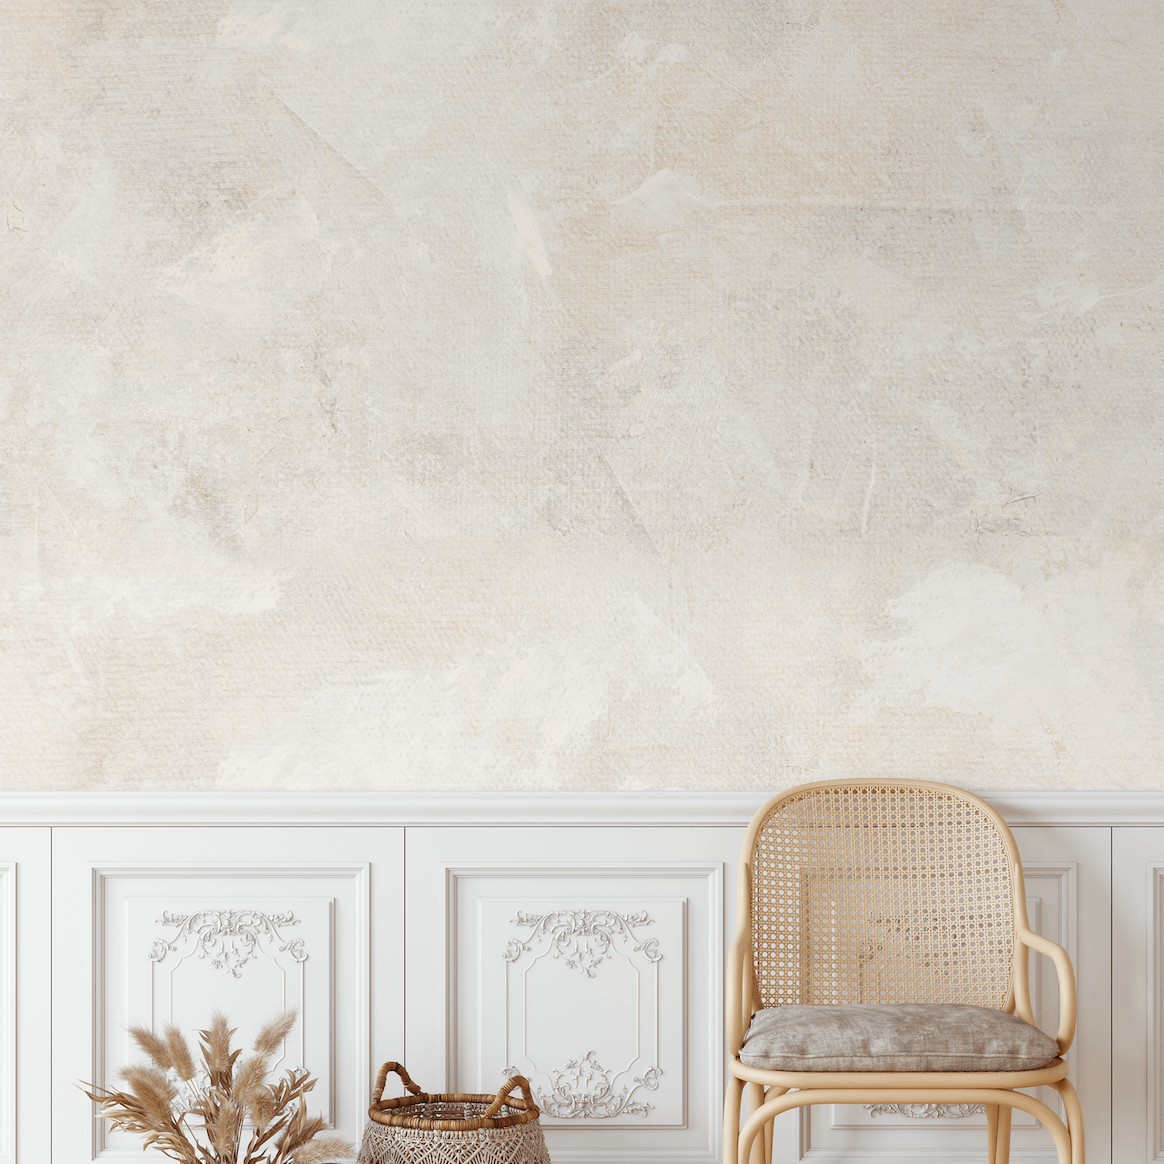 How To Limewash Your walls - Wallpaper Edition